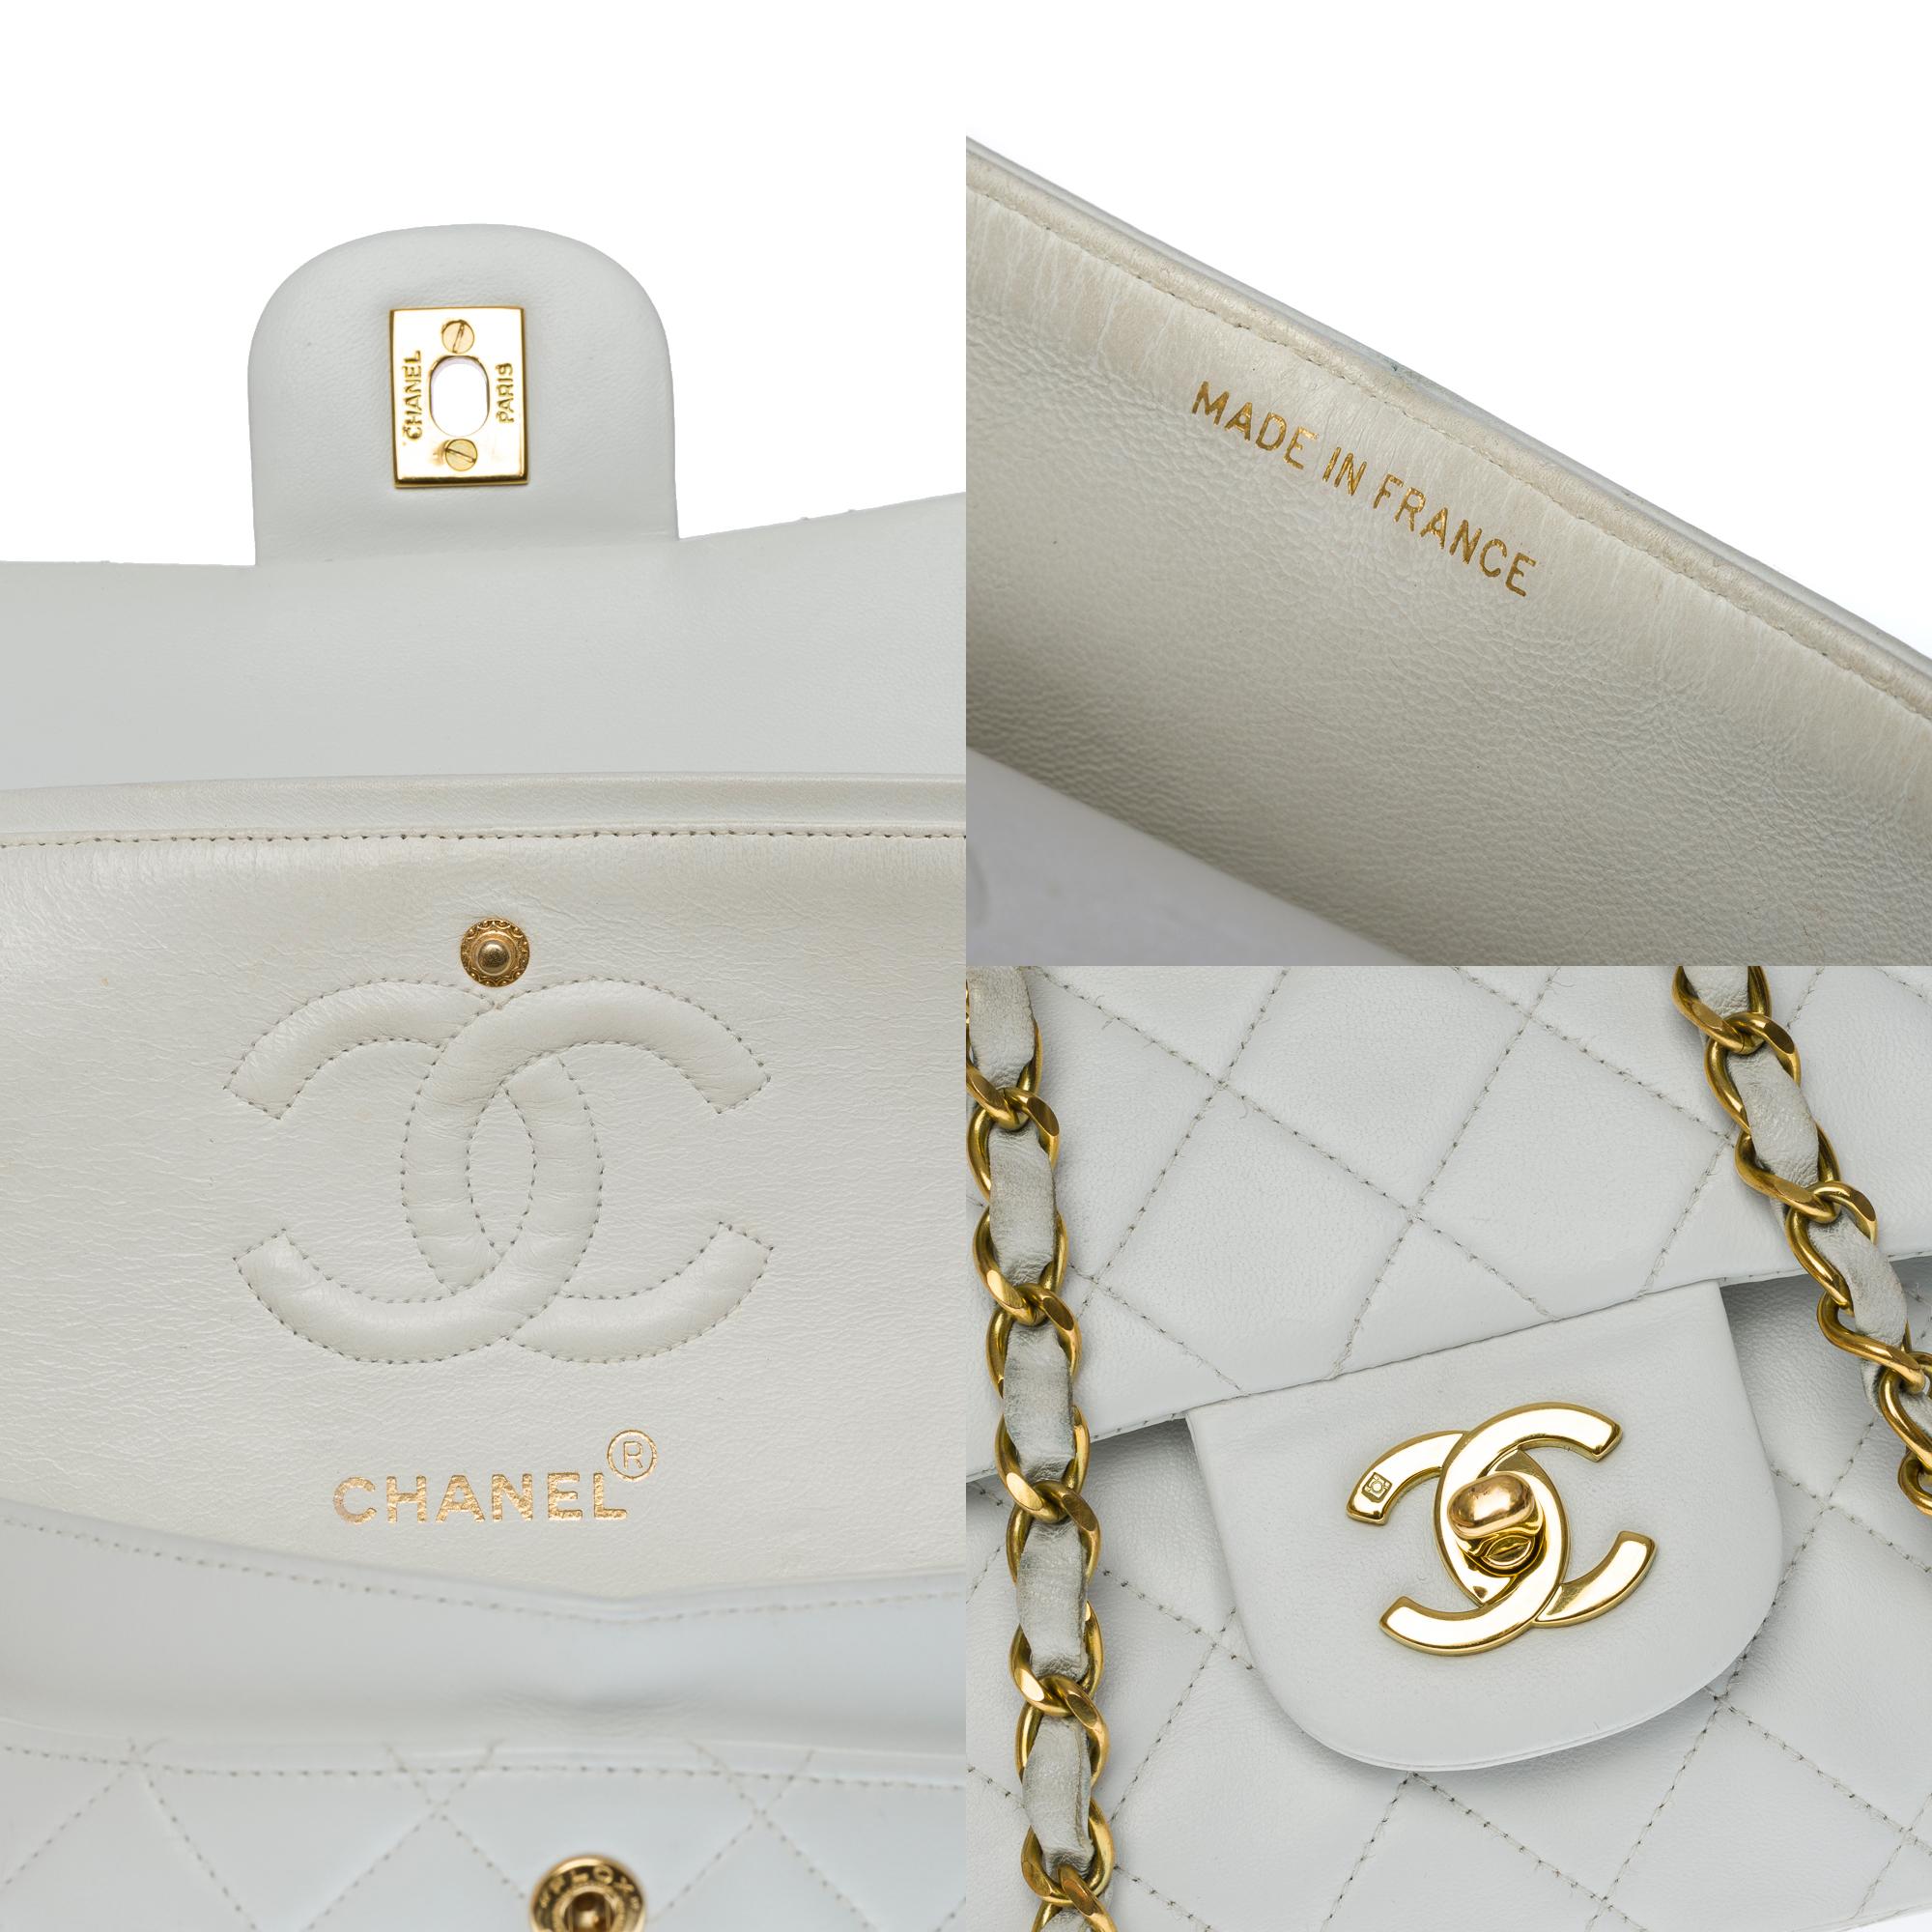 Chanel Timeless 23cm double flap Shoulder bag in White quilted lambskin, GHW 1